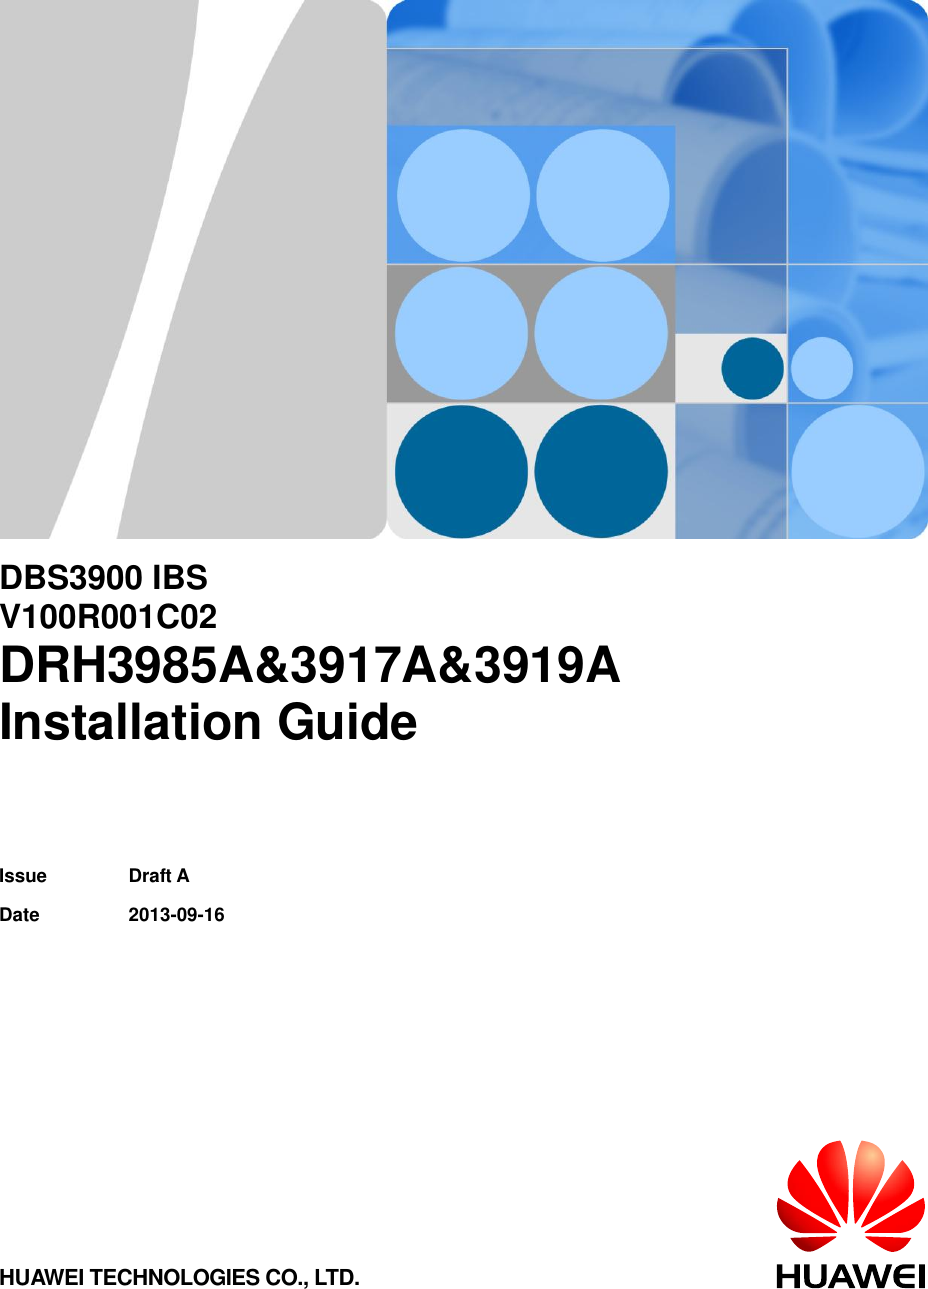         DBS3900 IBS V100R001C02 DRH3985A&amp;3917A&amp;3919A Installation Guide   Issue Draft A Date 2013-09-16 HUAWEI TECHNOLOGIES CO., LTD. 